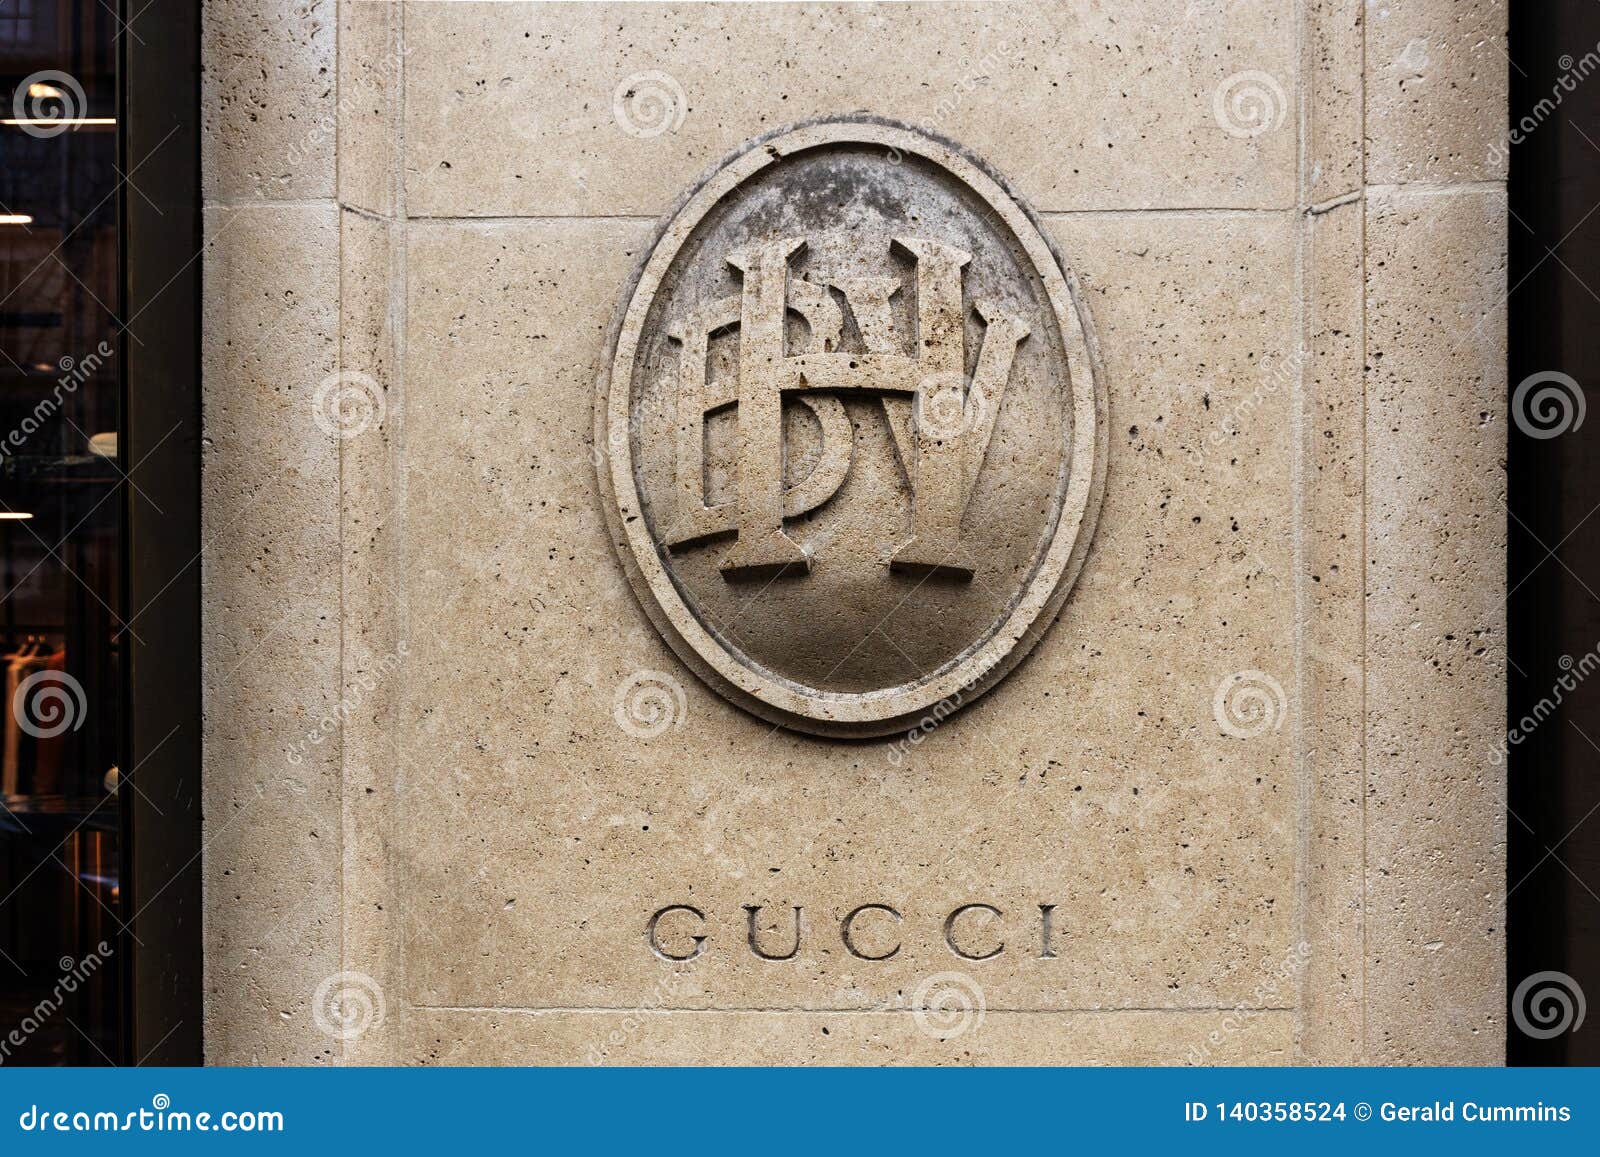 Gucci Bhv Paris Famous Department Store With The Word Gucci Engraved Onto A Piller Editorial Stock Image Image Of Entrance Piller 140358524